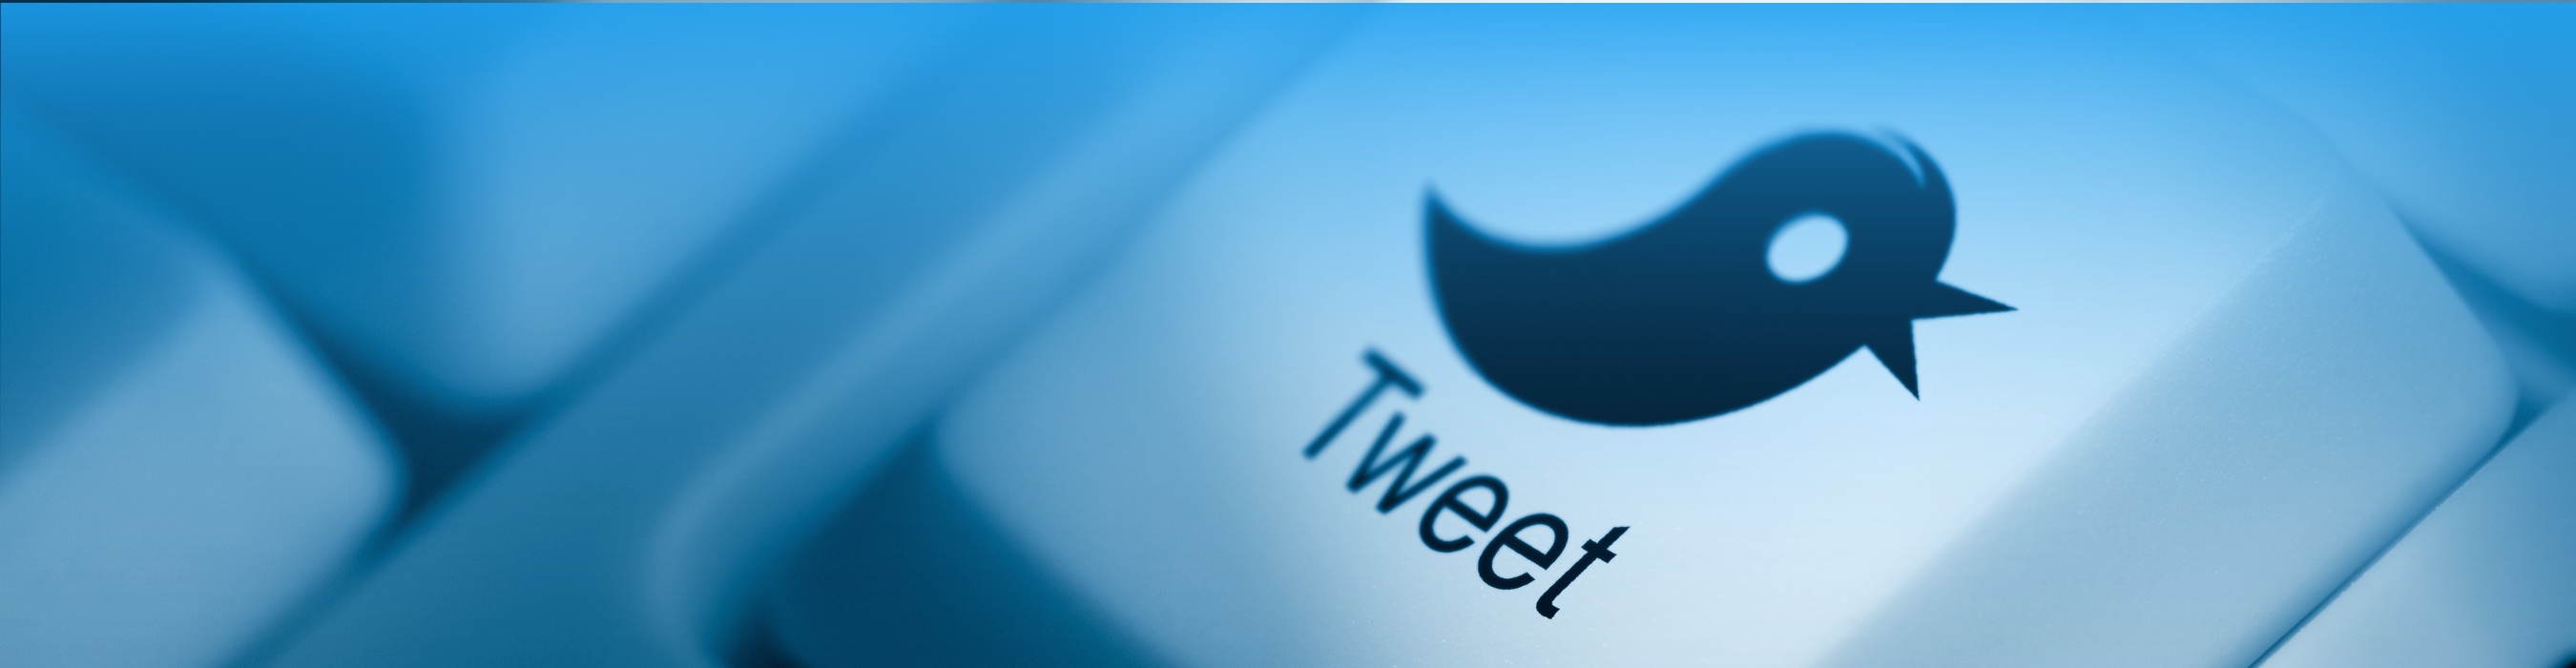 Twitter button with bird on keyboard